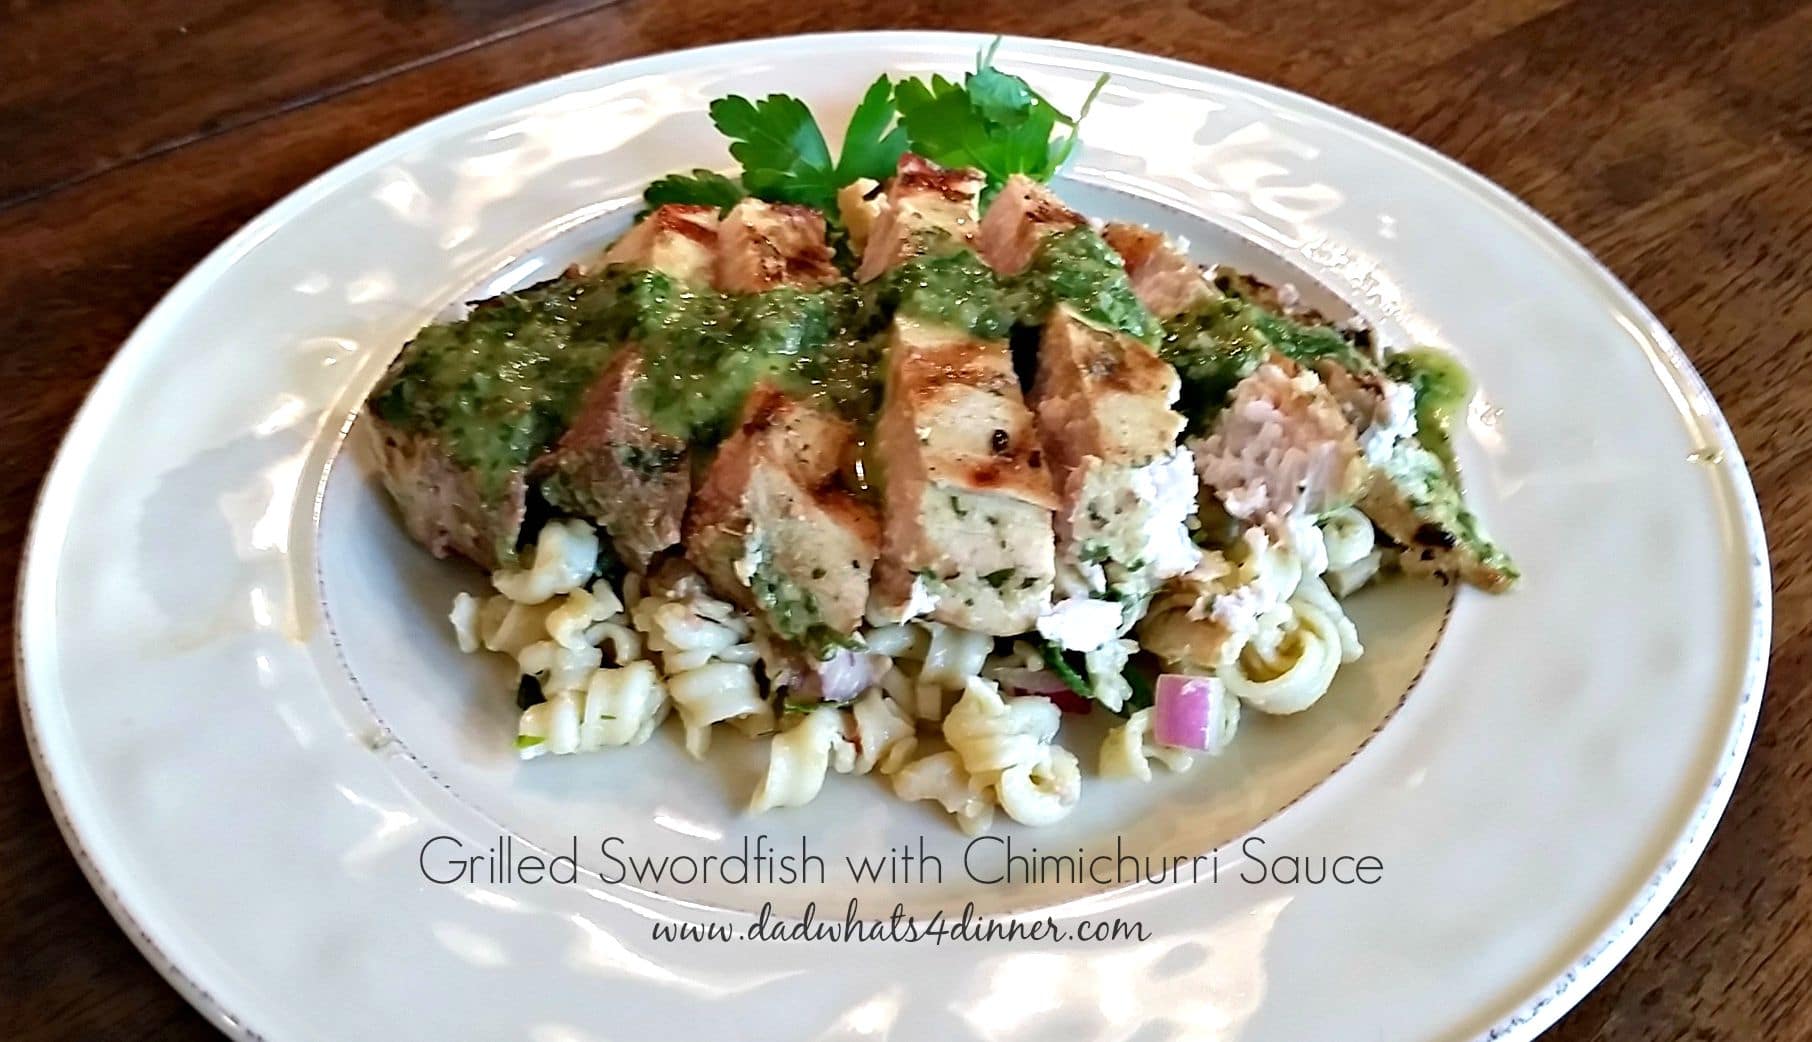 Grilled Swordfish with Chimichurri Sauce is a simple healthy grilling recipe bursting with bold flavors of the Chimichurri sauce!